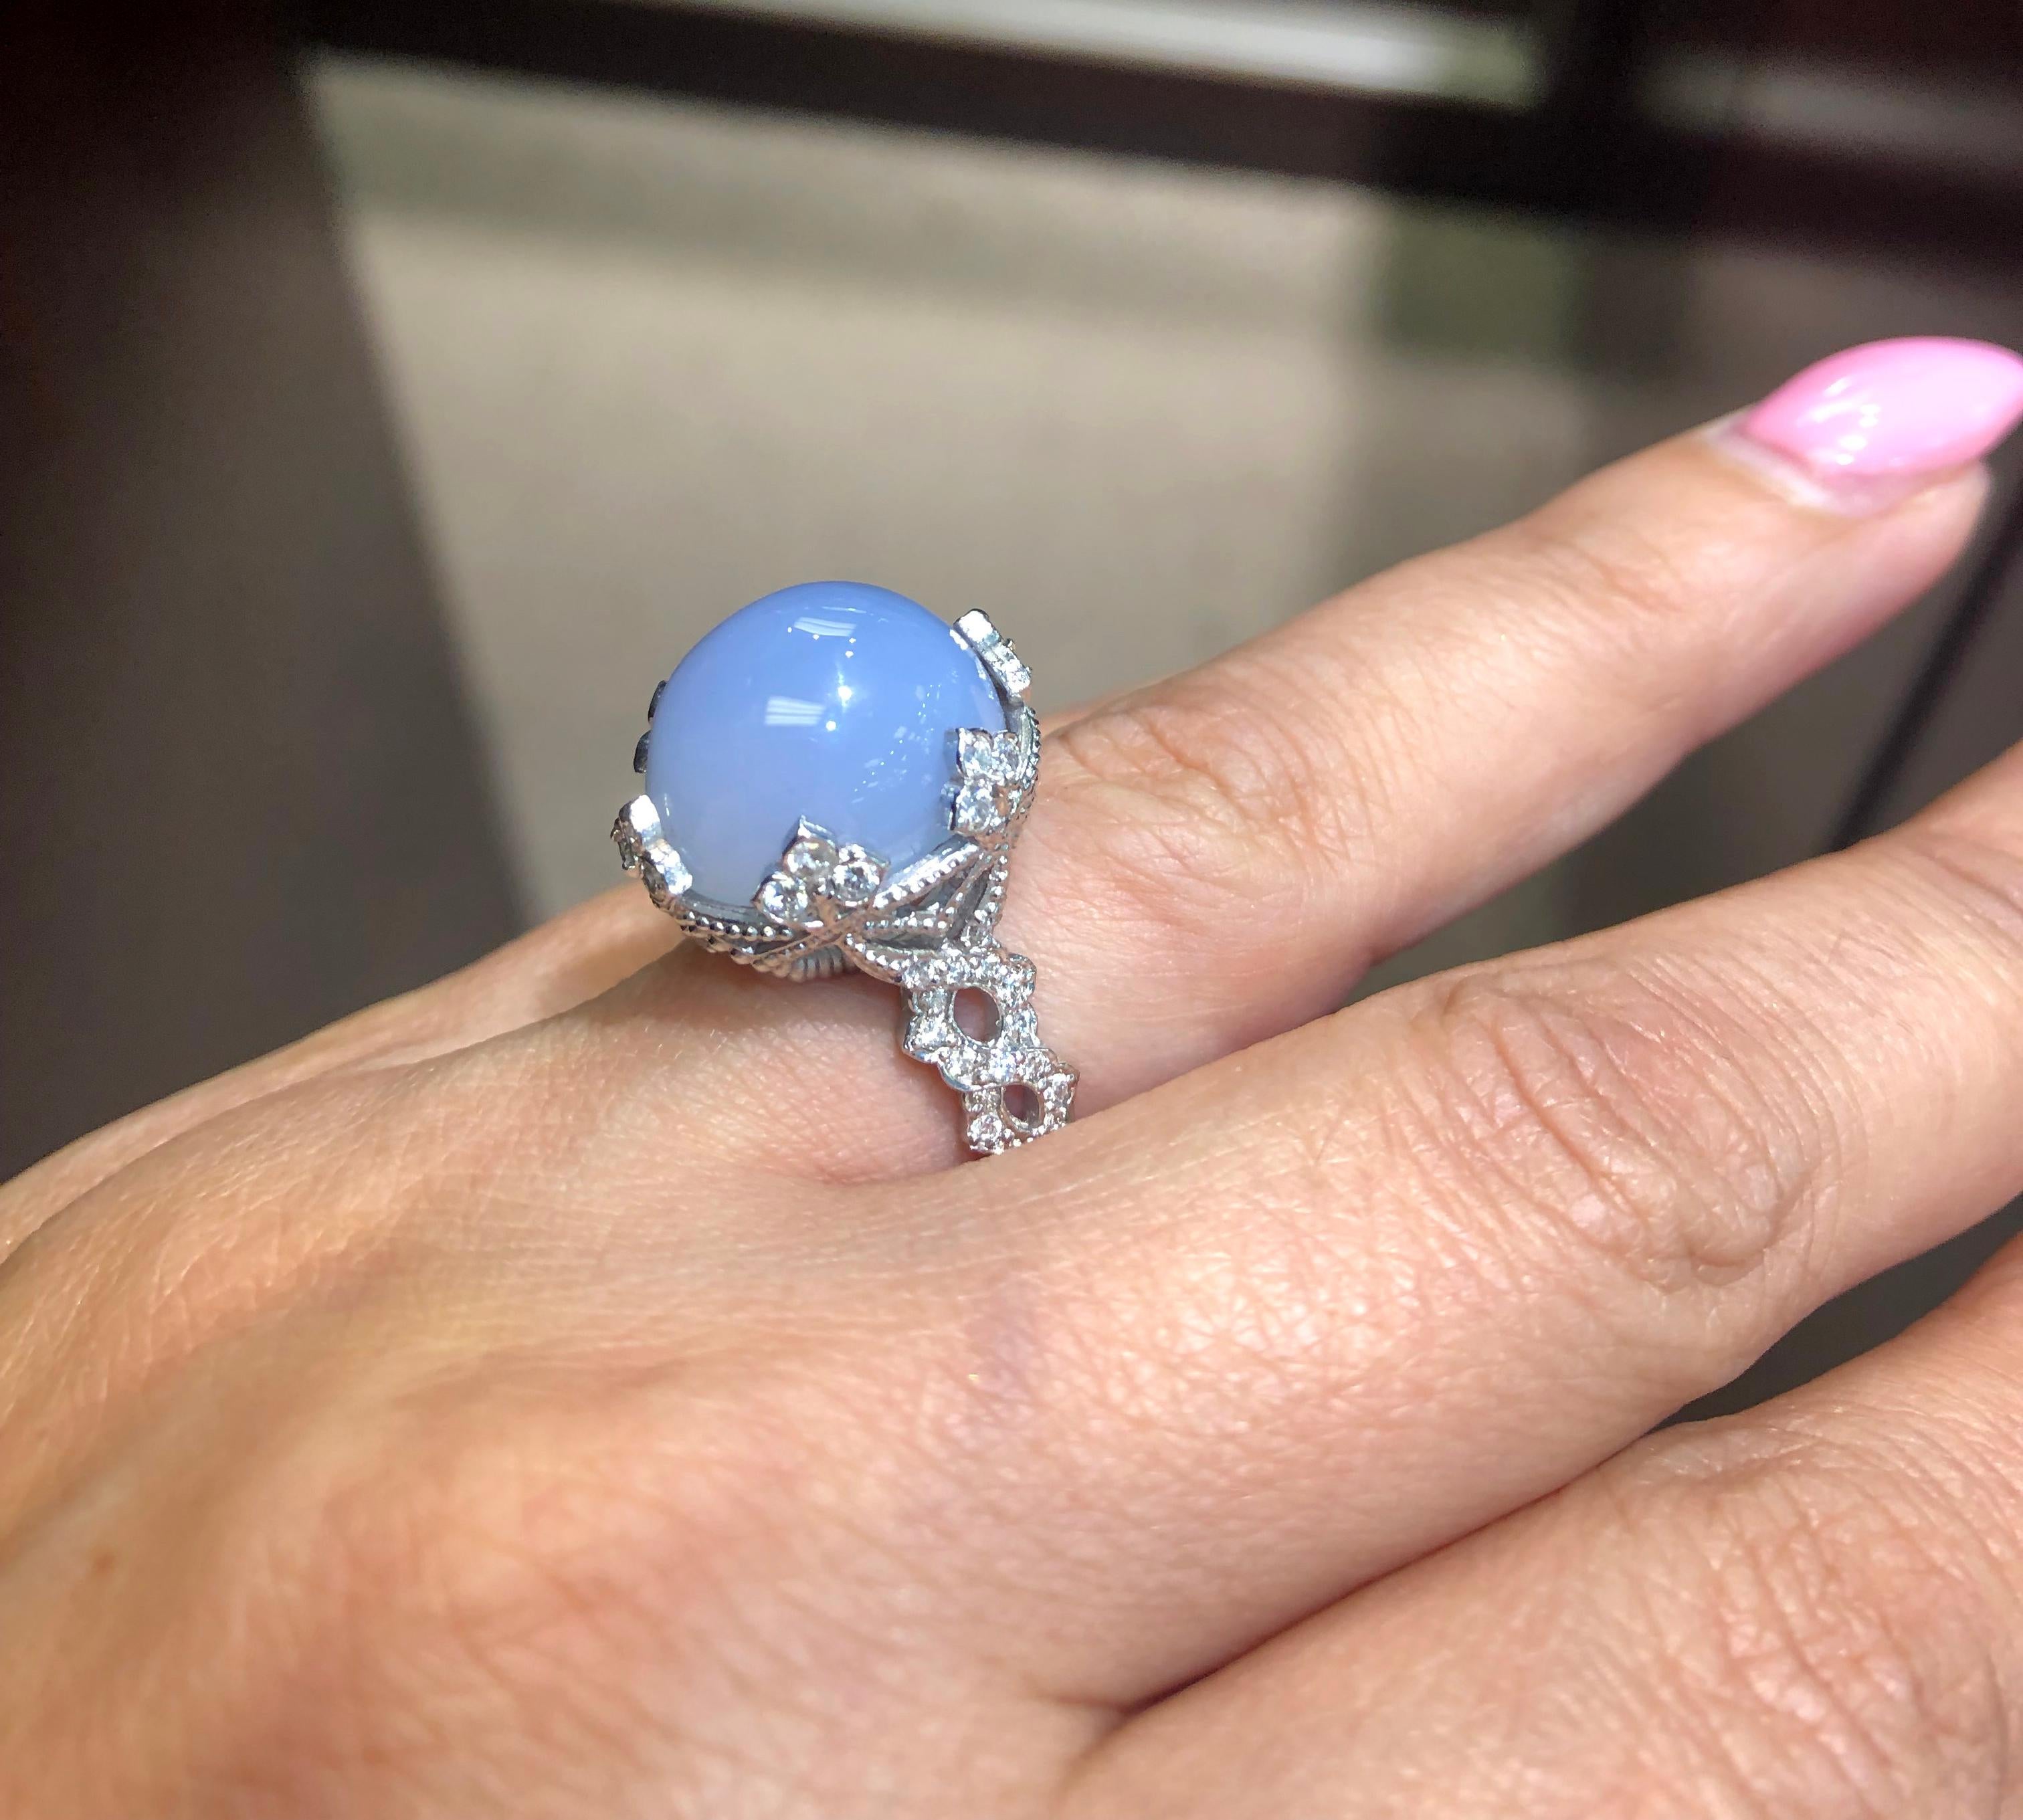 Women's Stambolian White Gold and Diamond Cocktail Ring with Blue Chalcedony Center